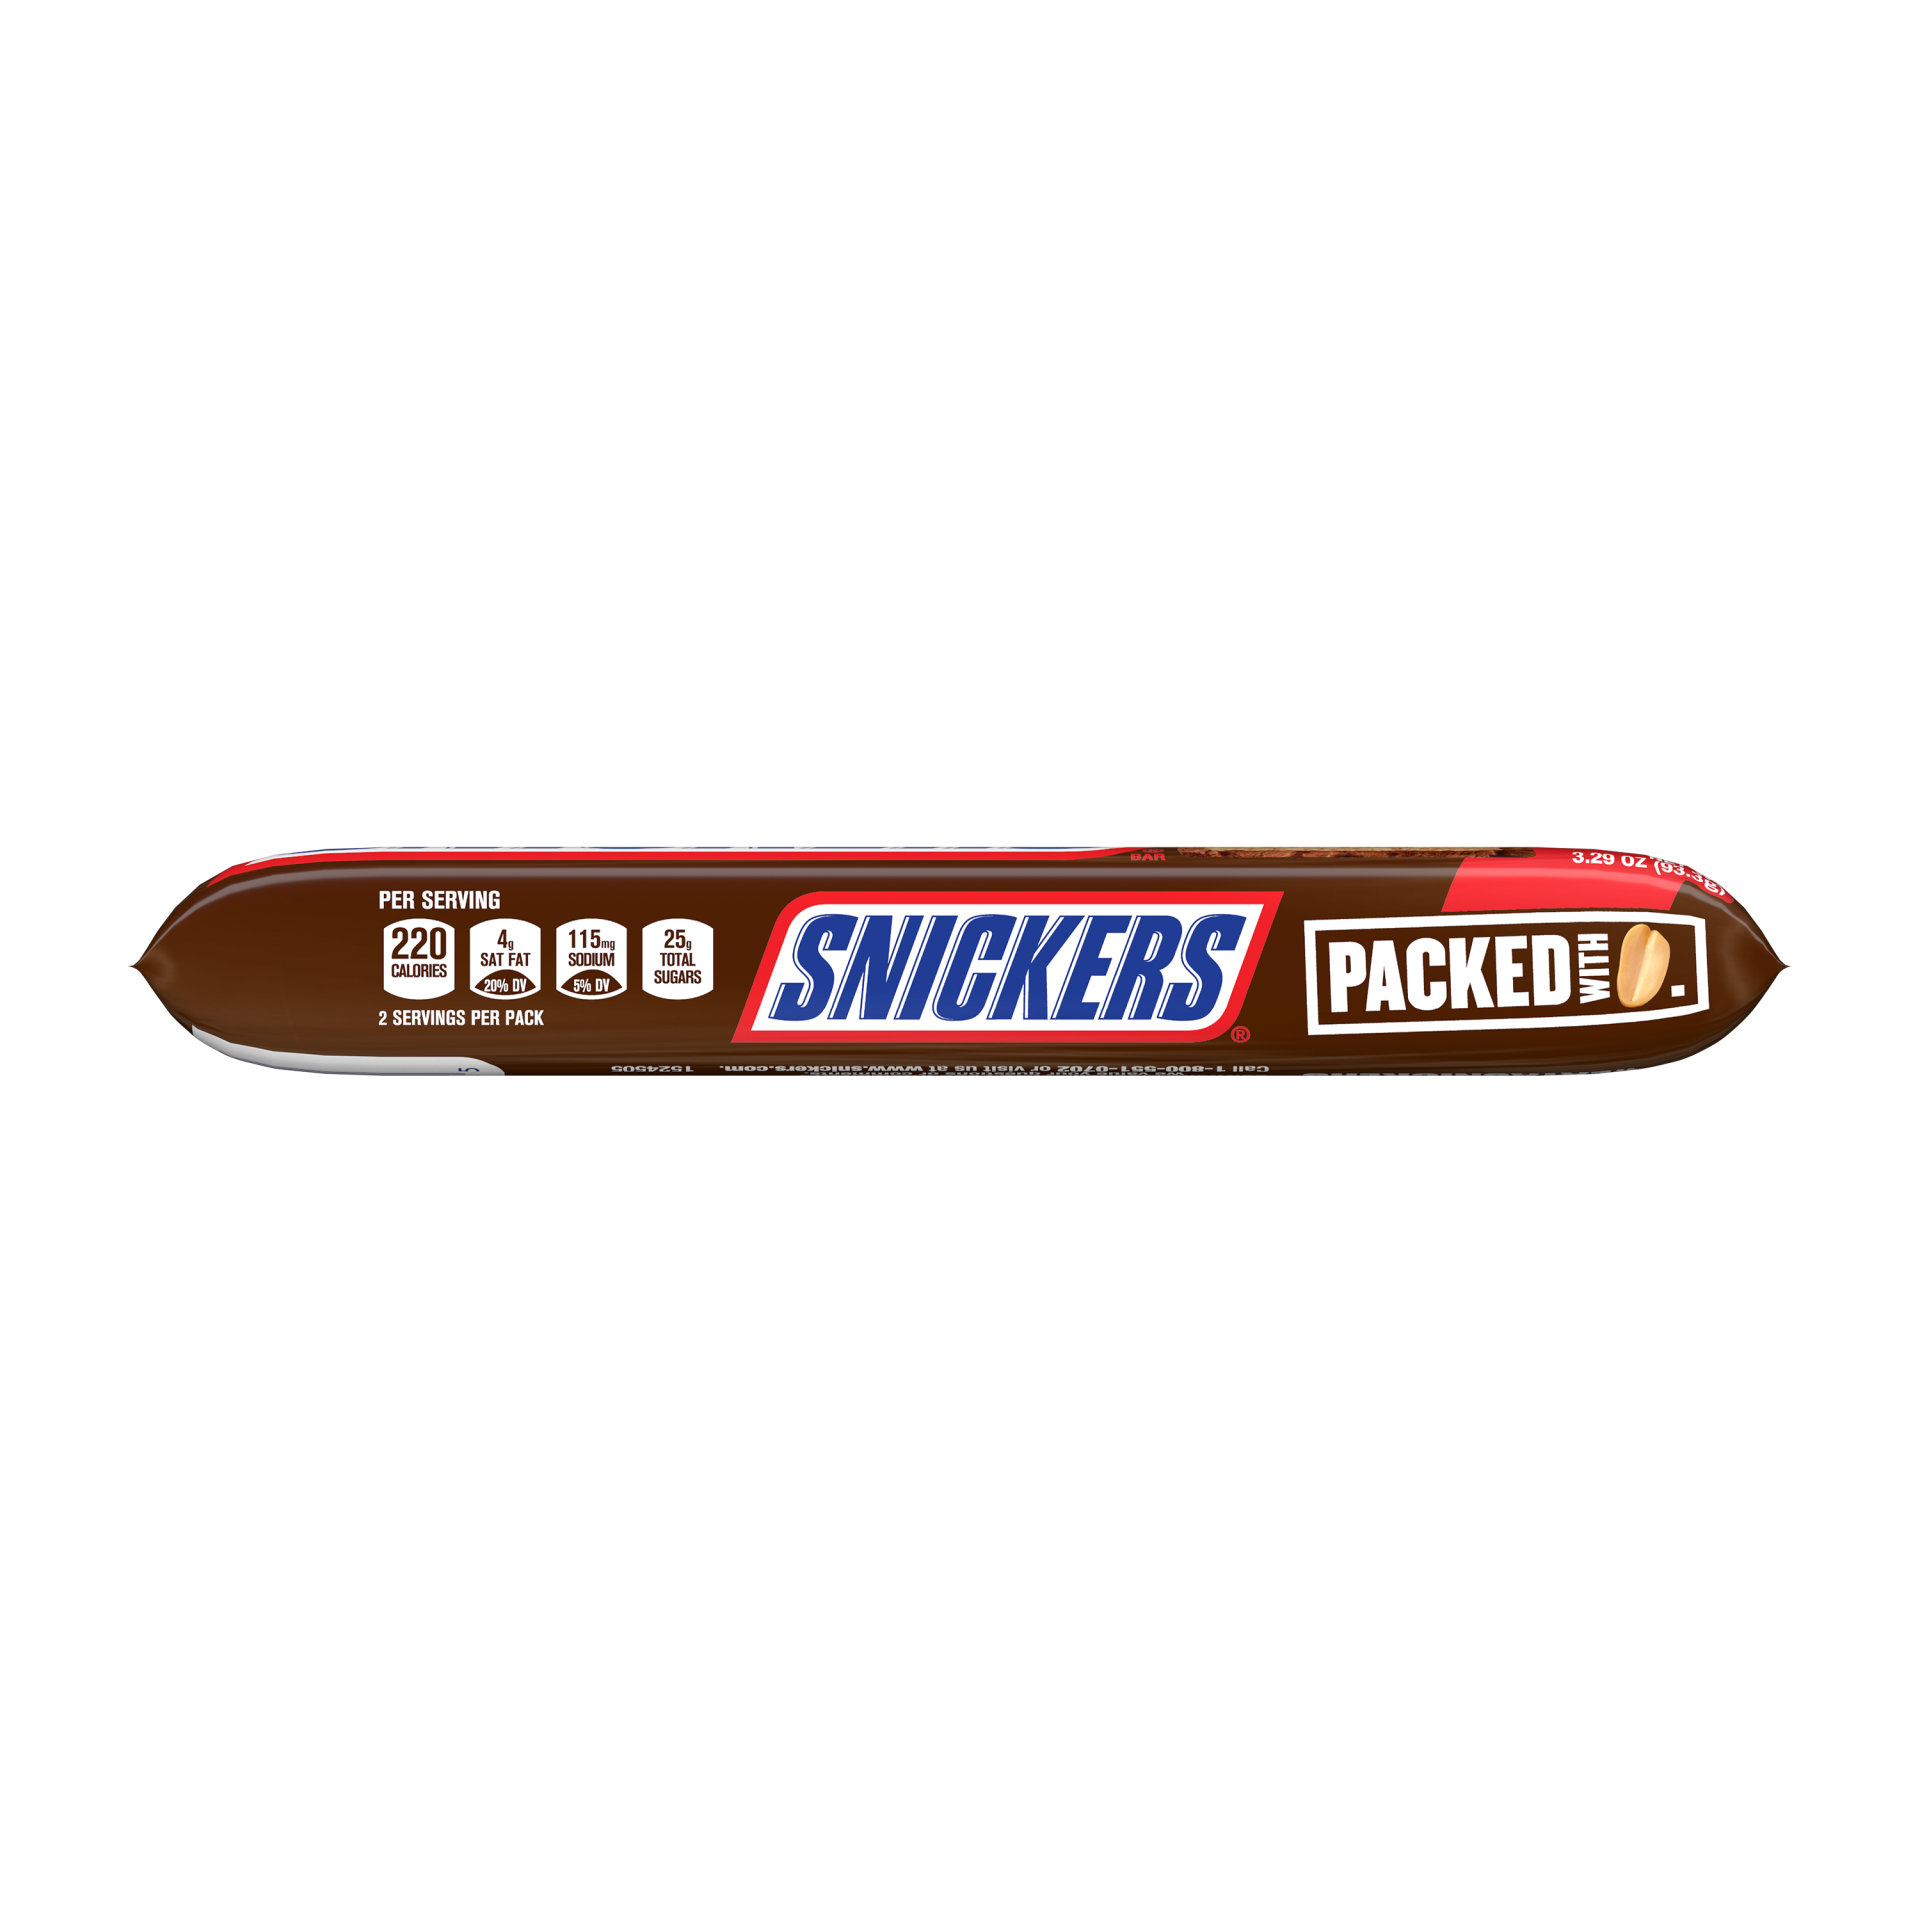 slide 5 of 5, SNICKERS, Milk Chocolate Candy Bar, Sharing Size, 3.29 oz